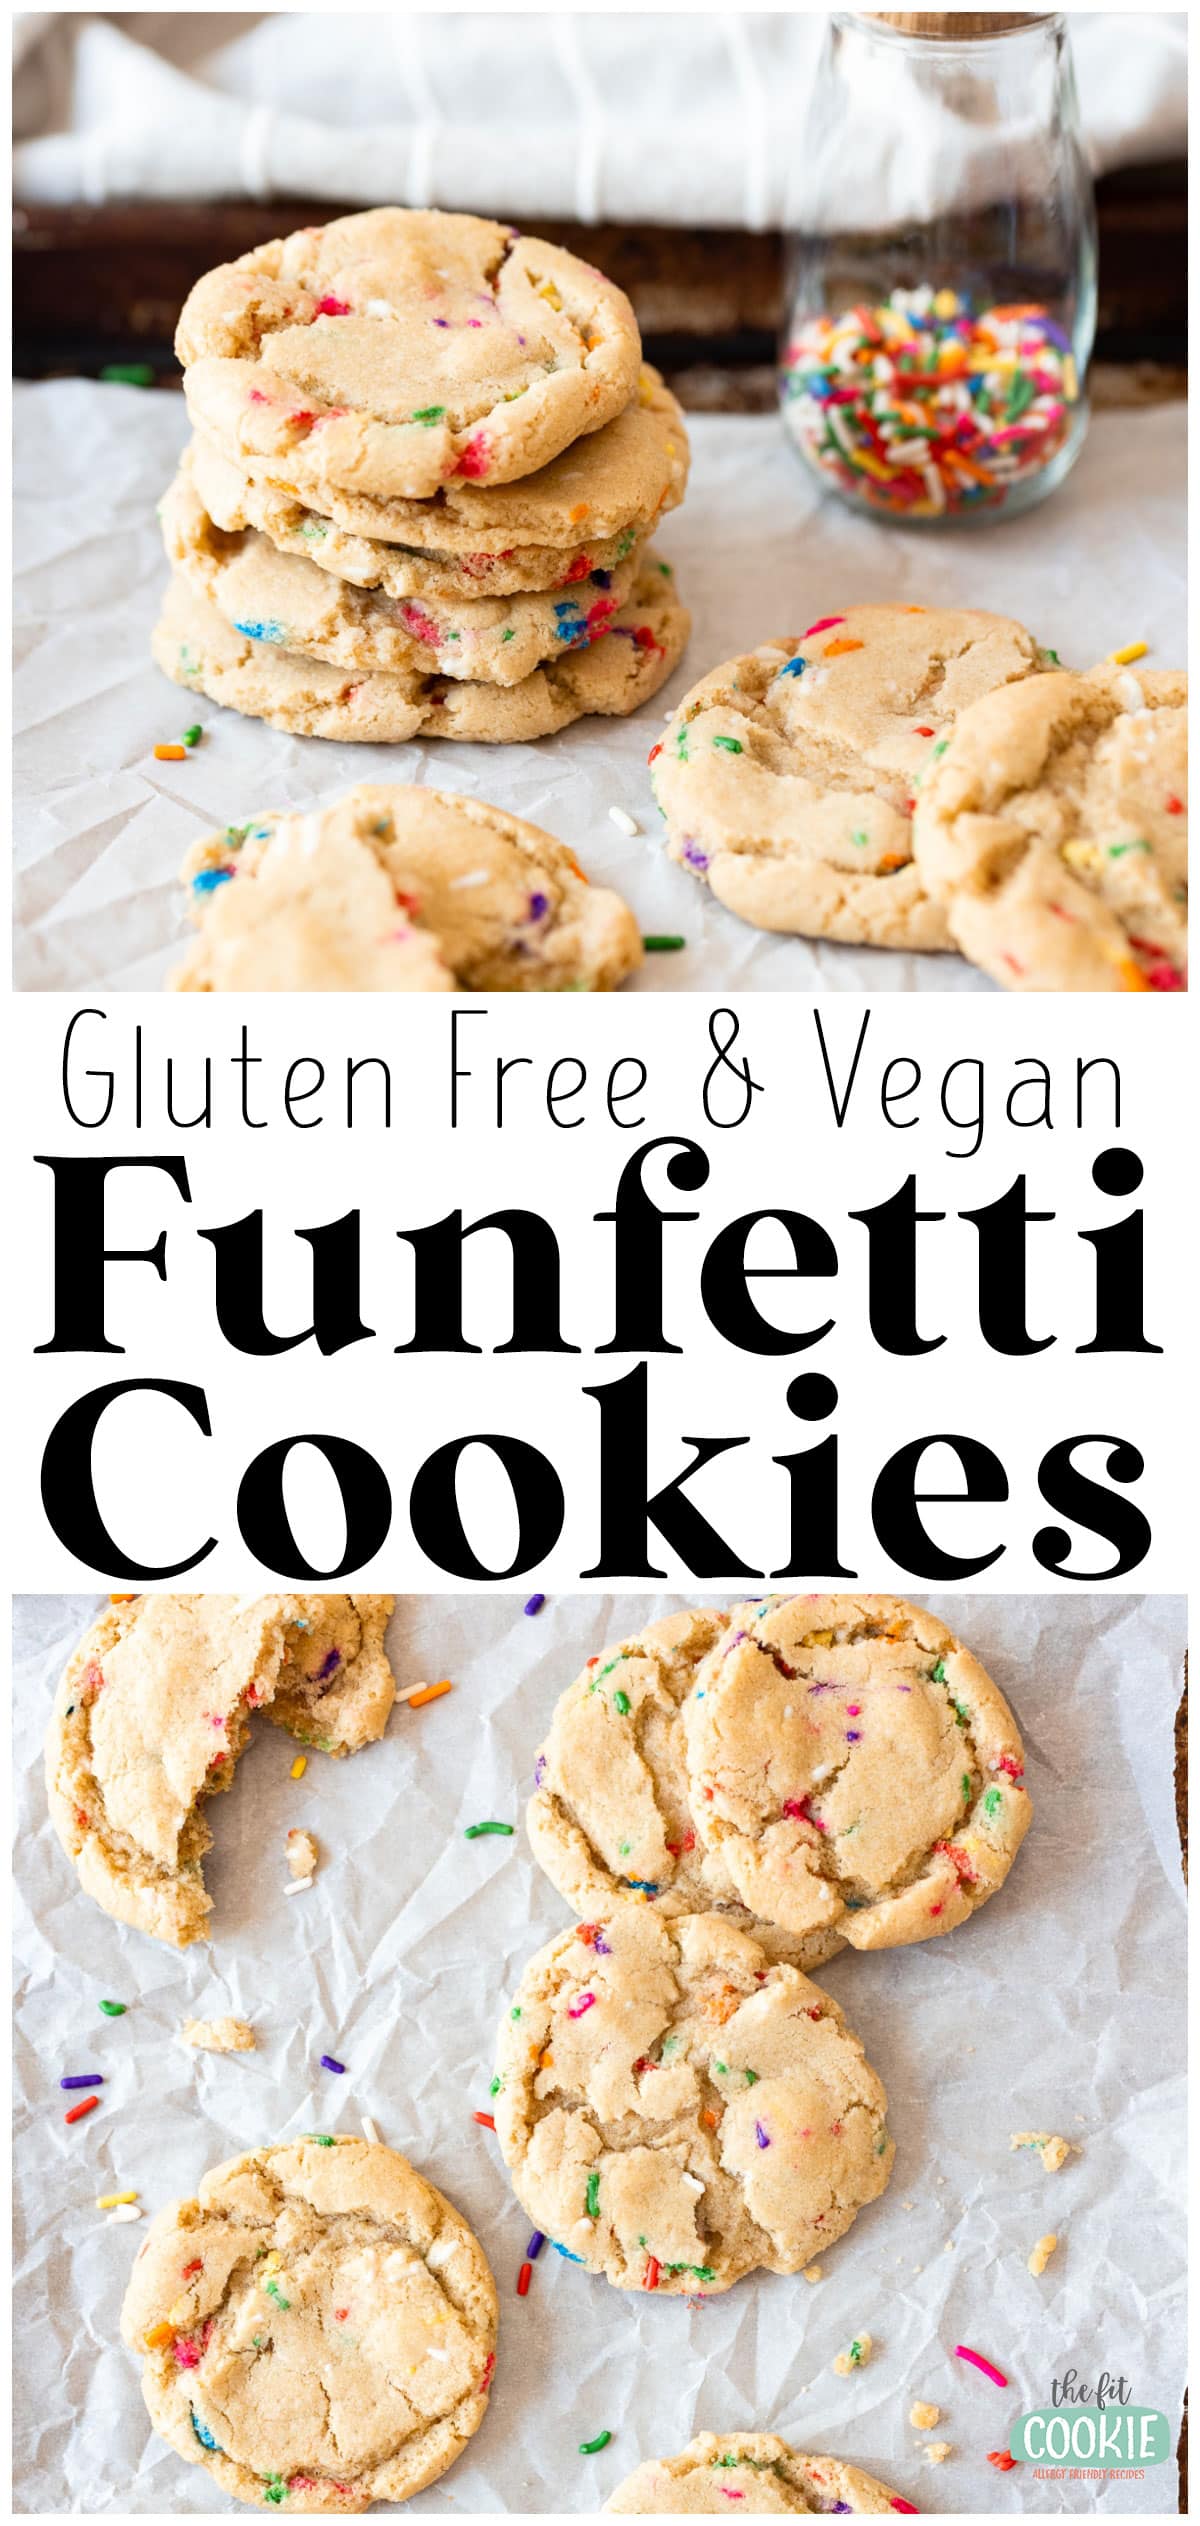 photo collage of gluten free funfetti cookies on parchment paper. 